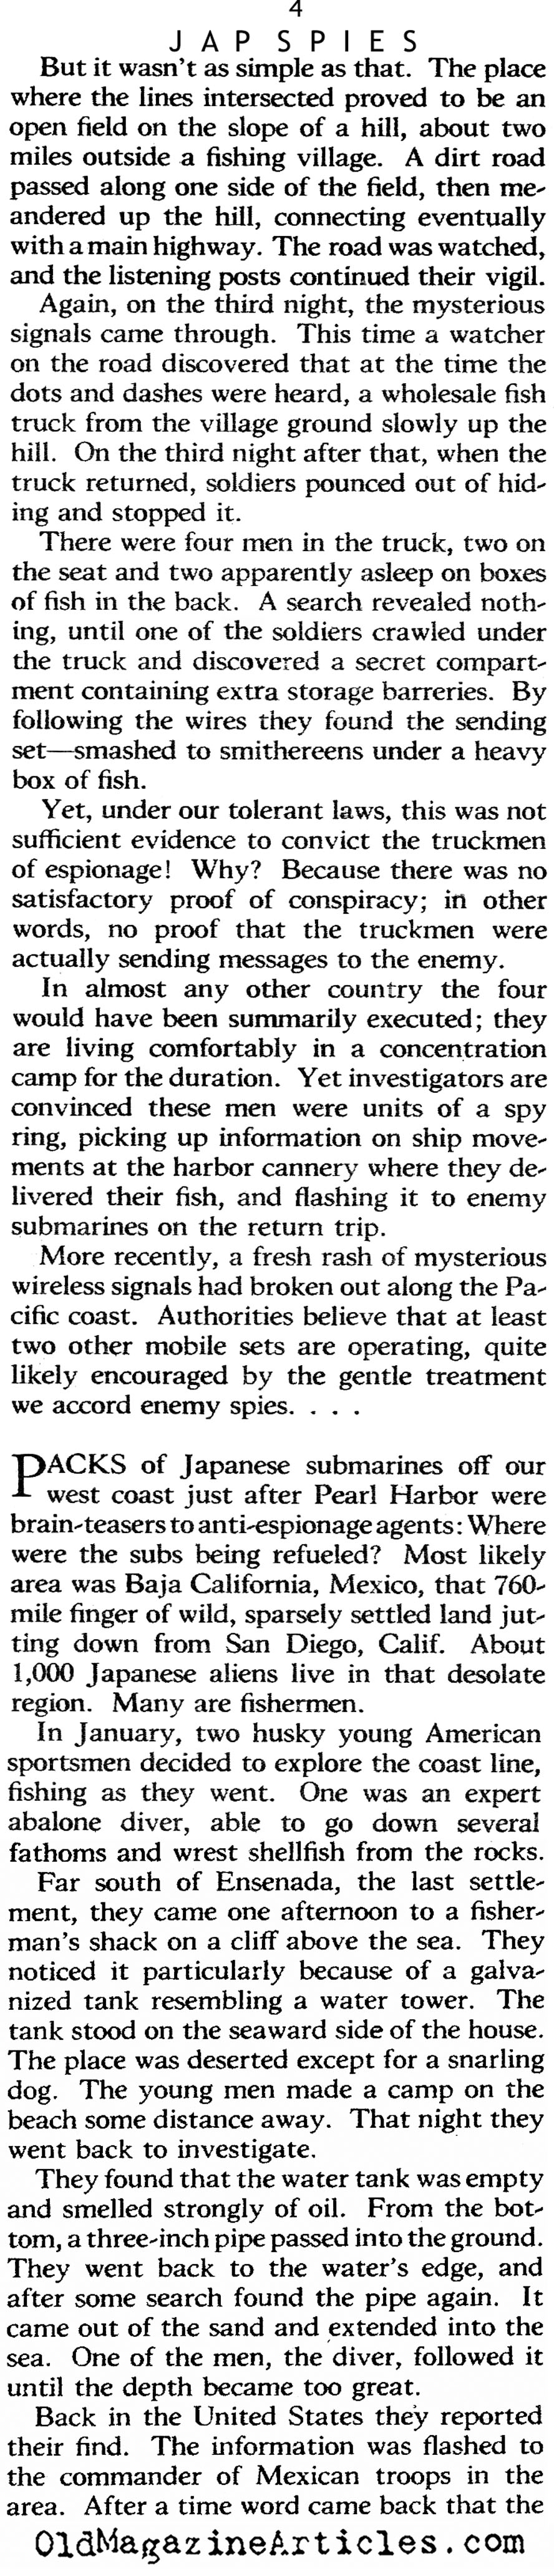 Finding Japanese Spies (The American Magazine, 1942)